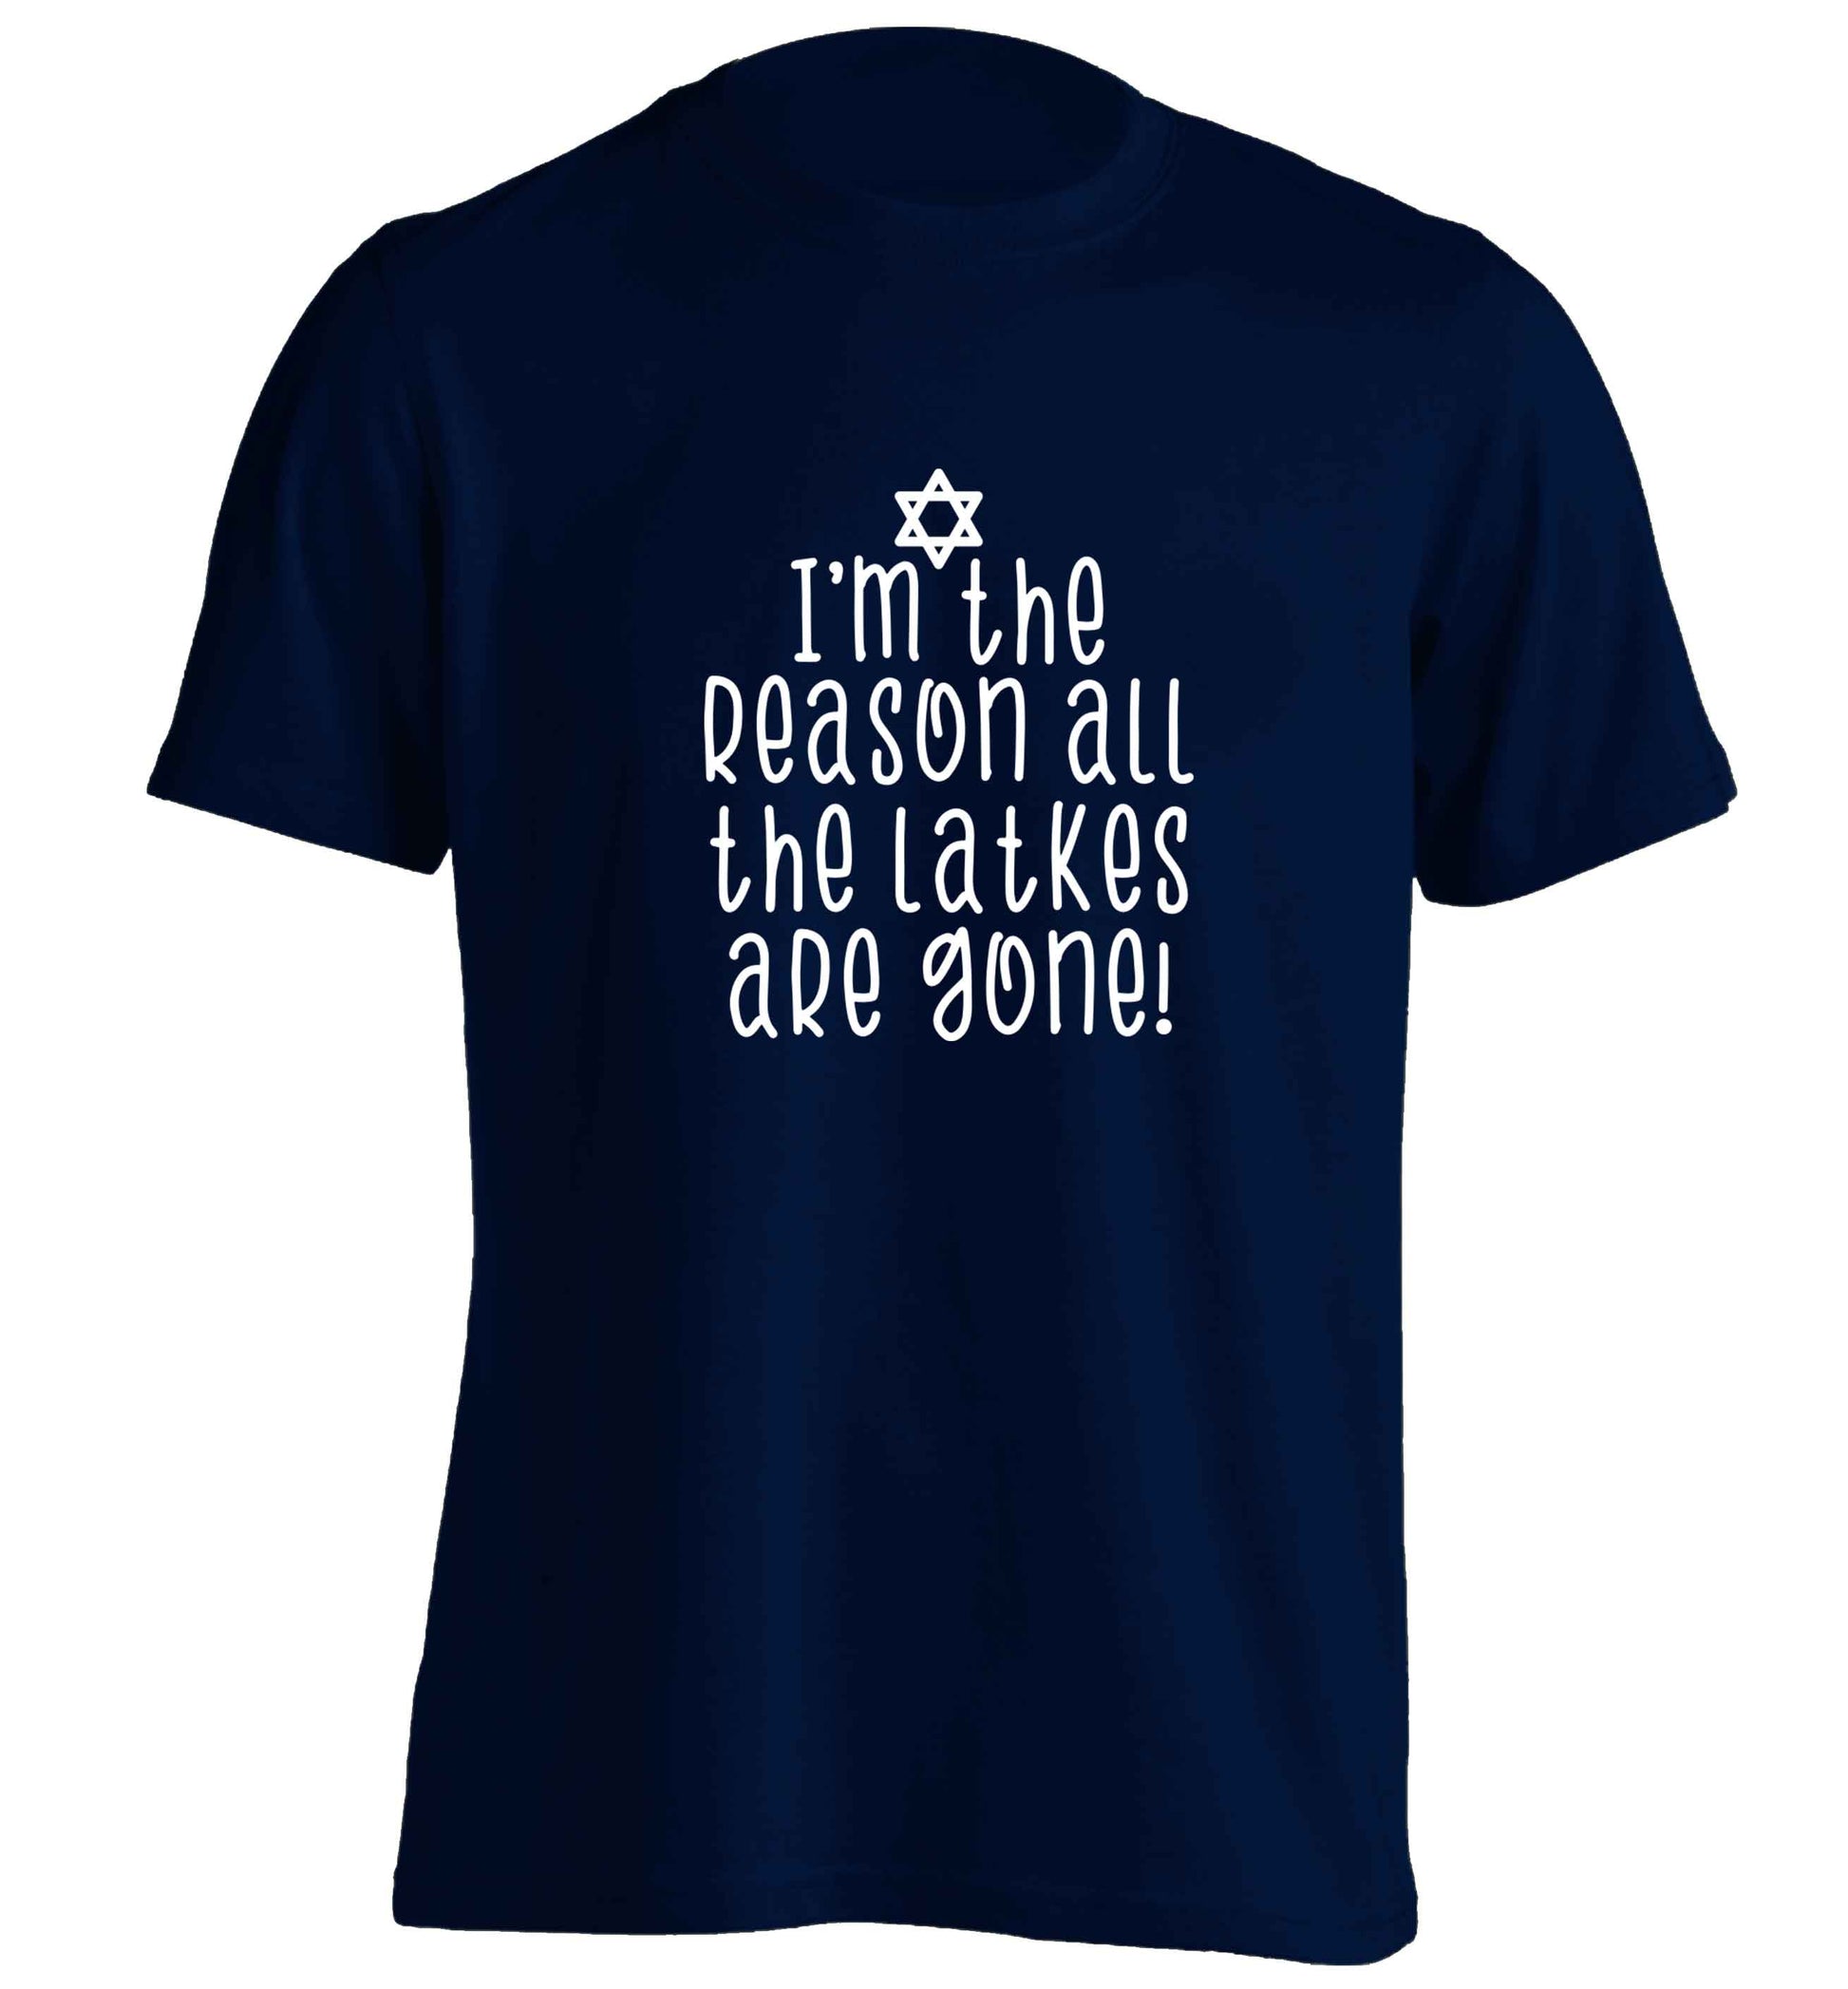 I'm the reason all the latkes are gone adults unisex navy Tshirt 2XL